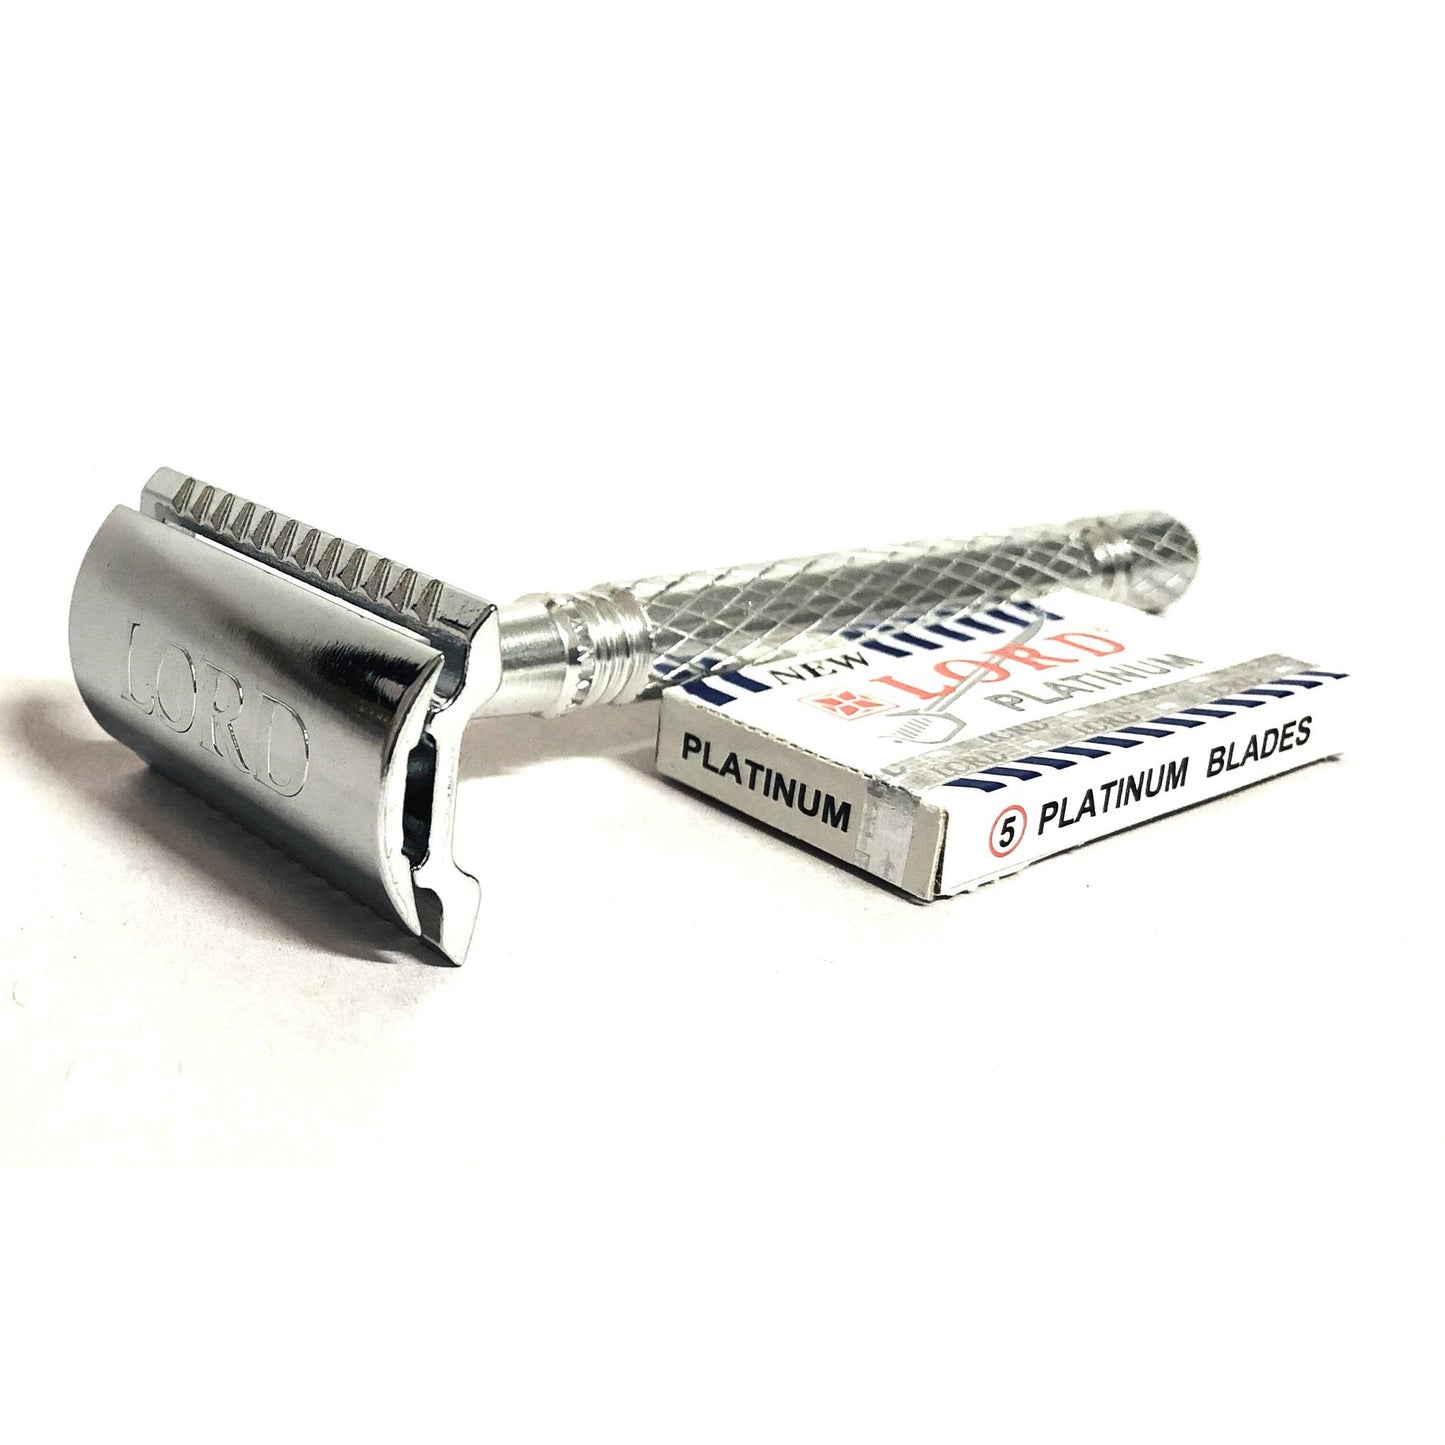 Lord Safety Razor - Silver Handle